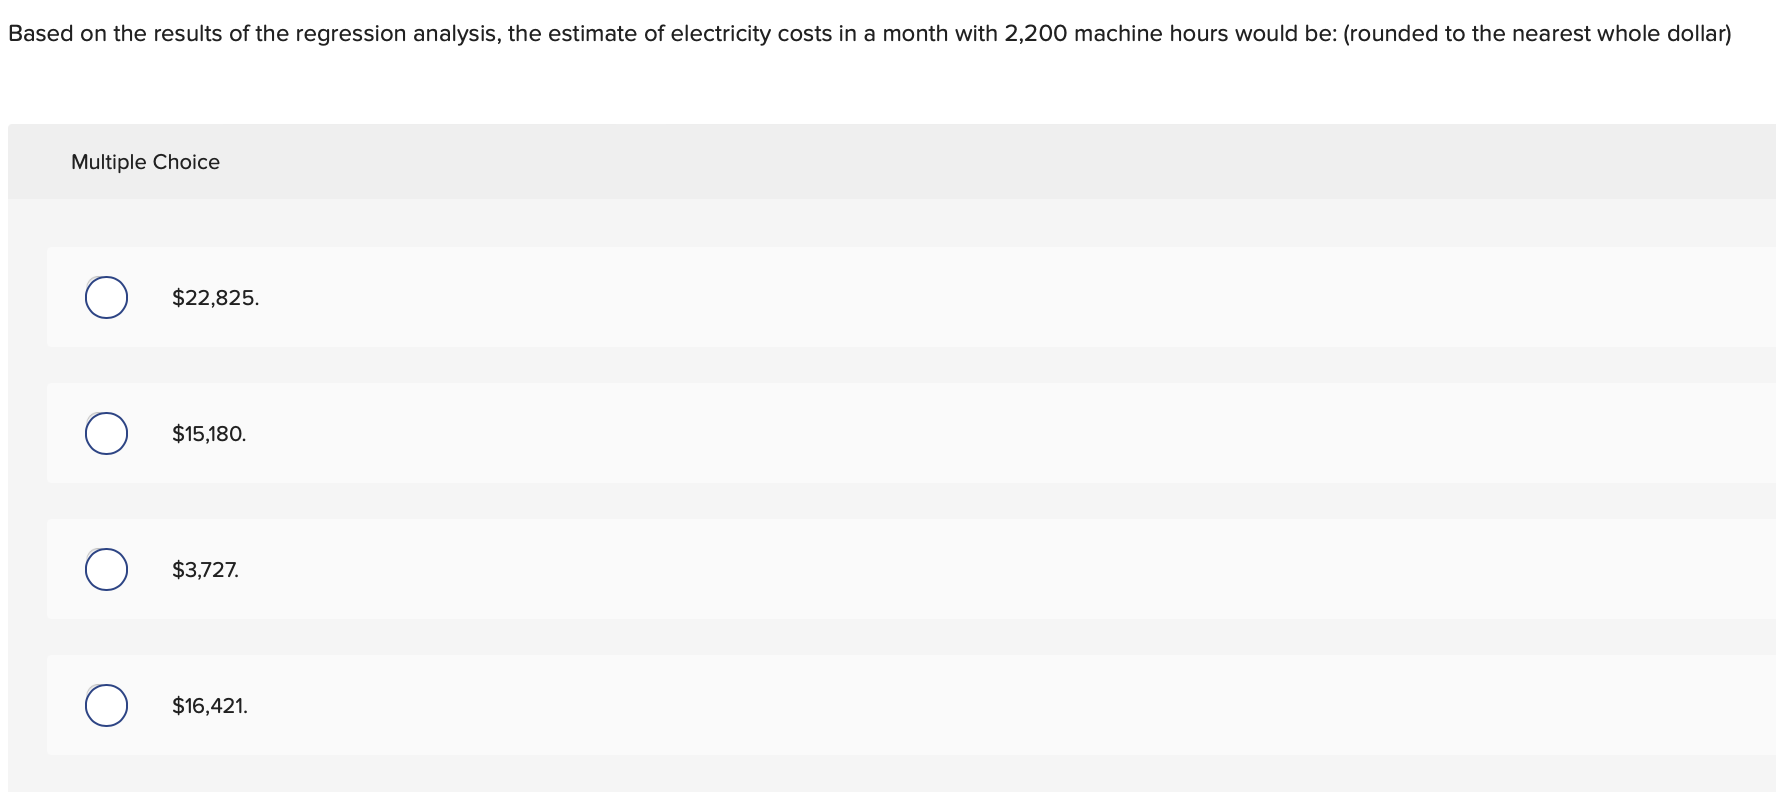 Based on the results of the regression analysis, the estimate of electricity costs in a month with 2,200